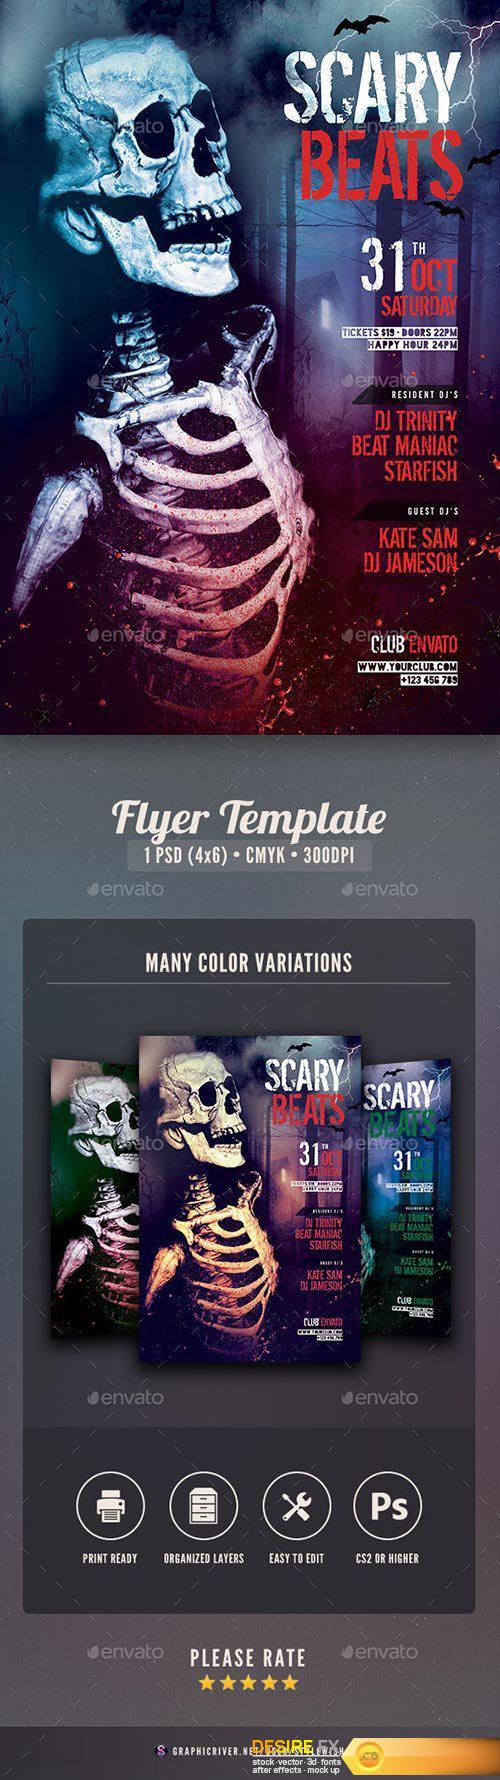 Graphicriver - Scary Beats Flyer 12924359